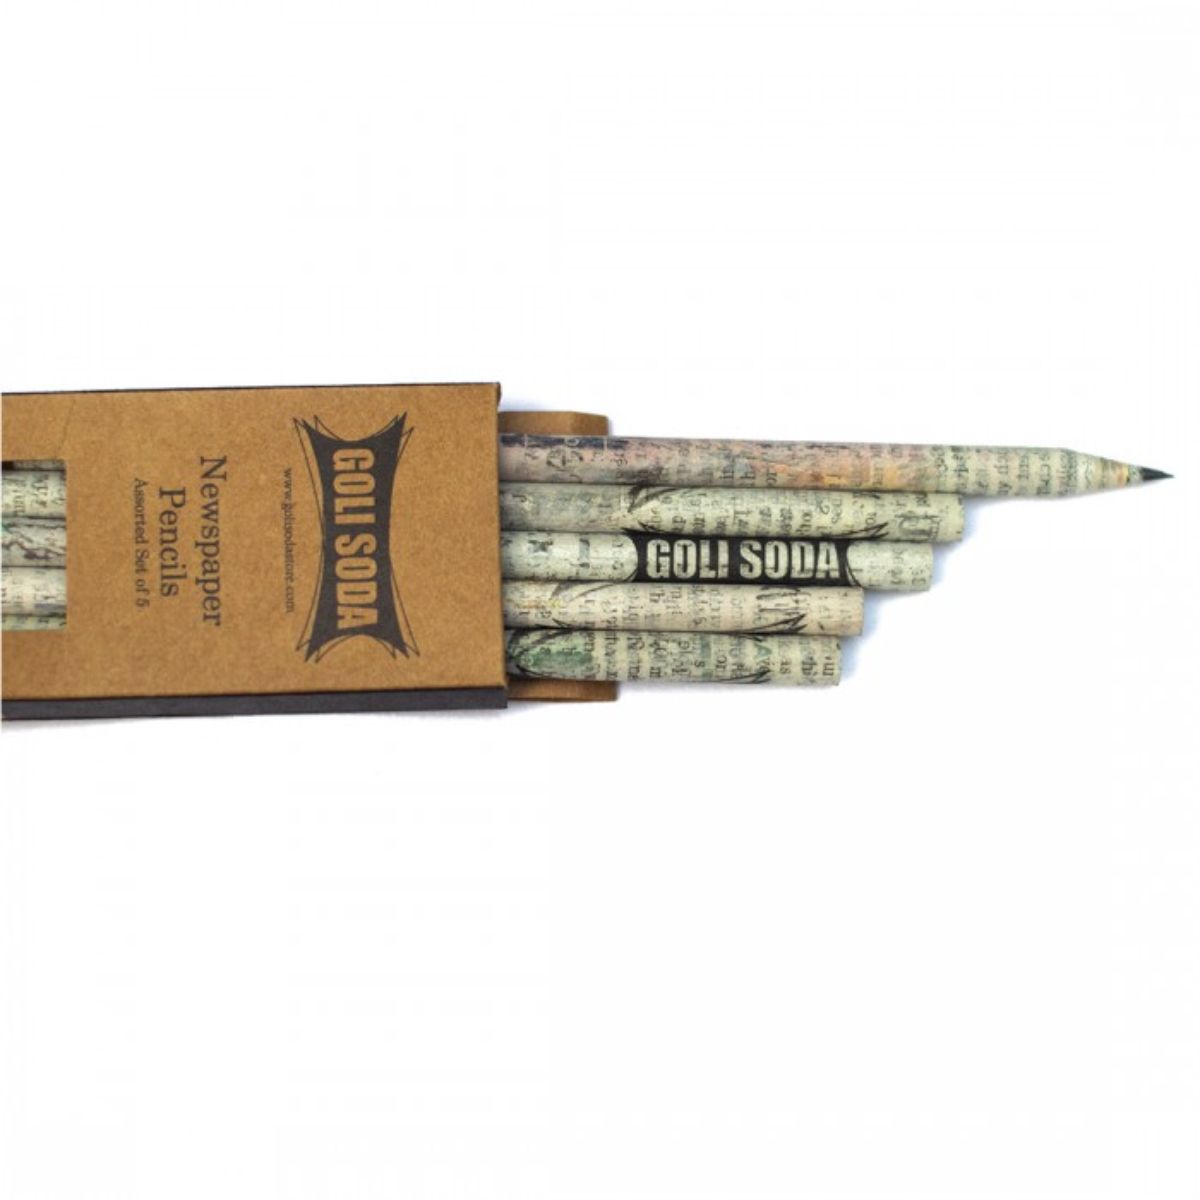 Upcycled Plain Newspaper Pencils